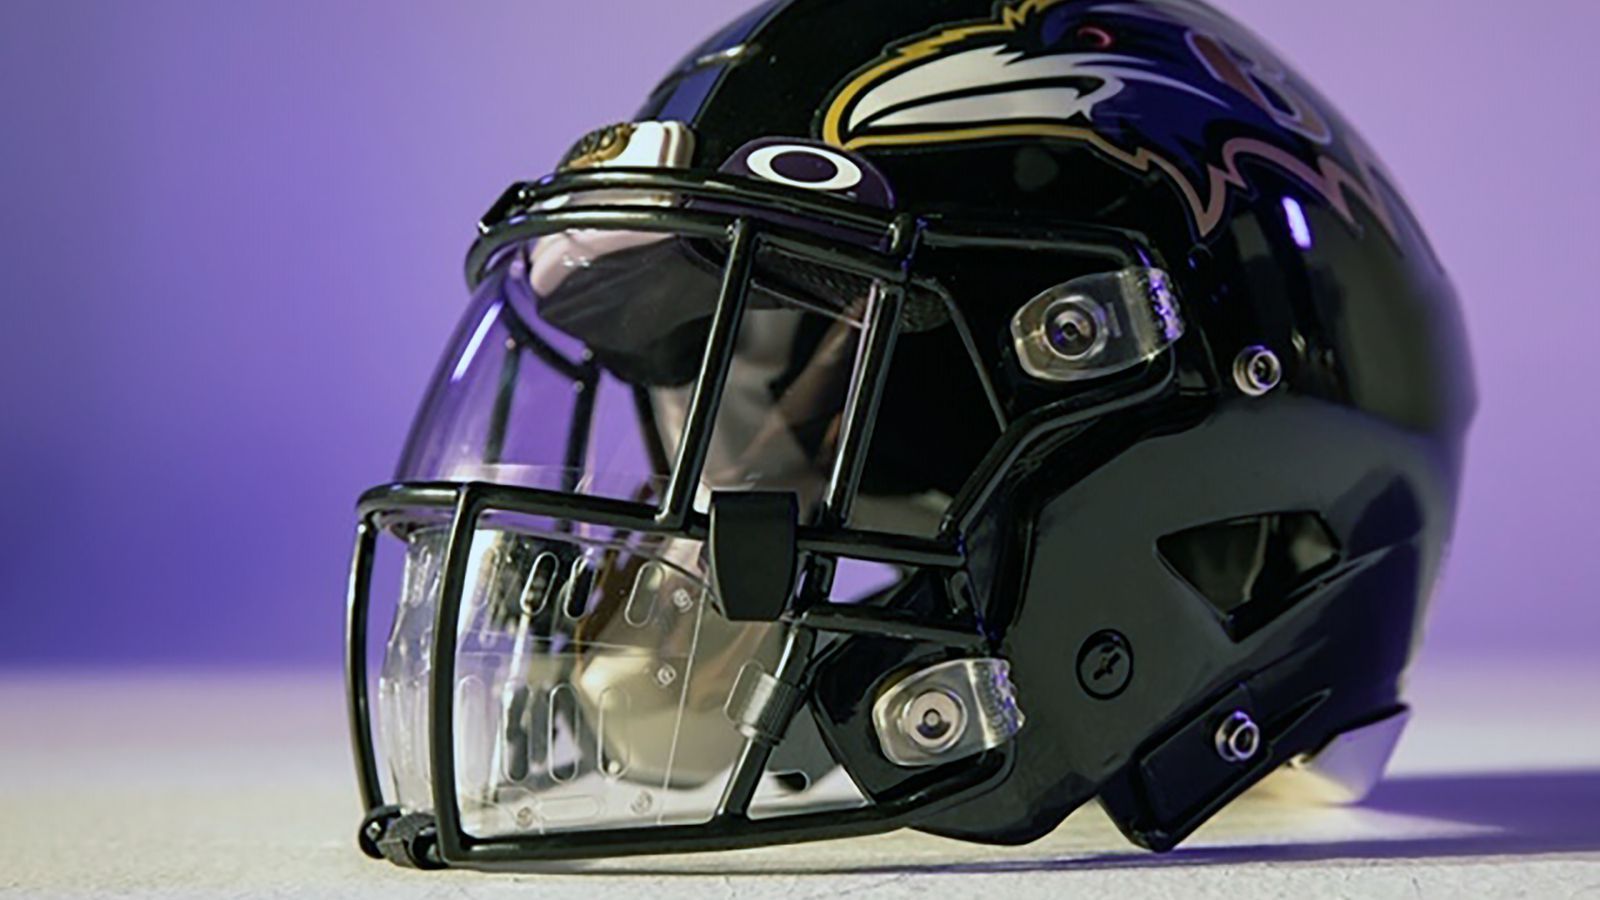 NFL, Oakley come up with face shields to protect players